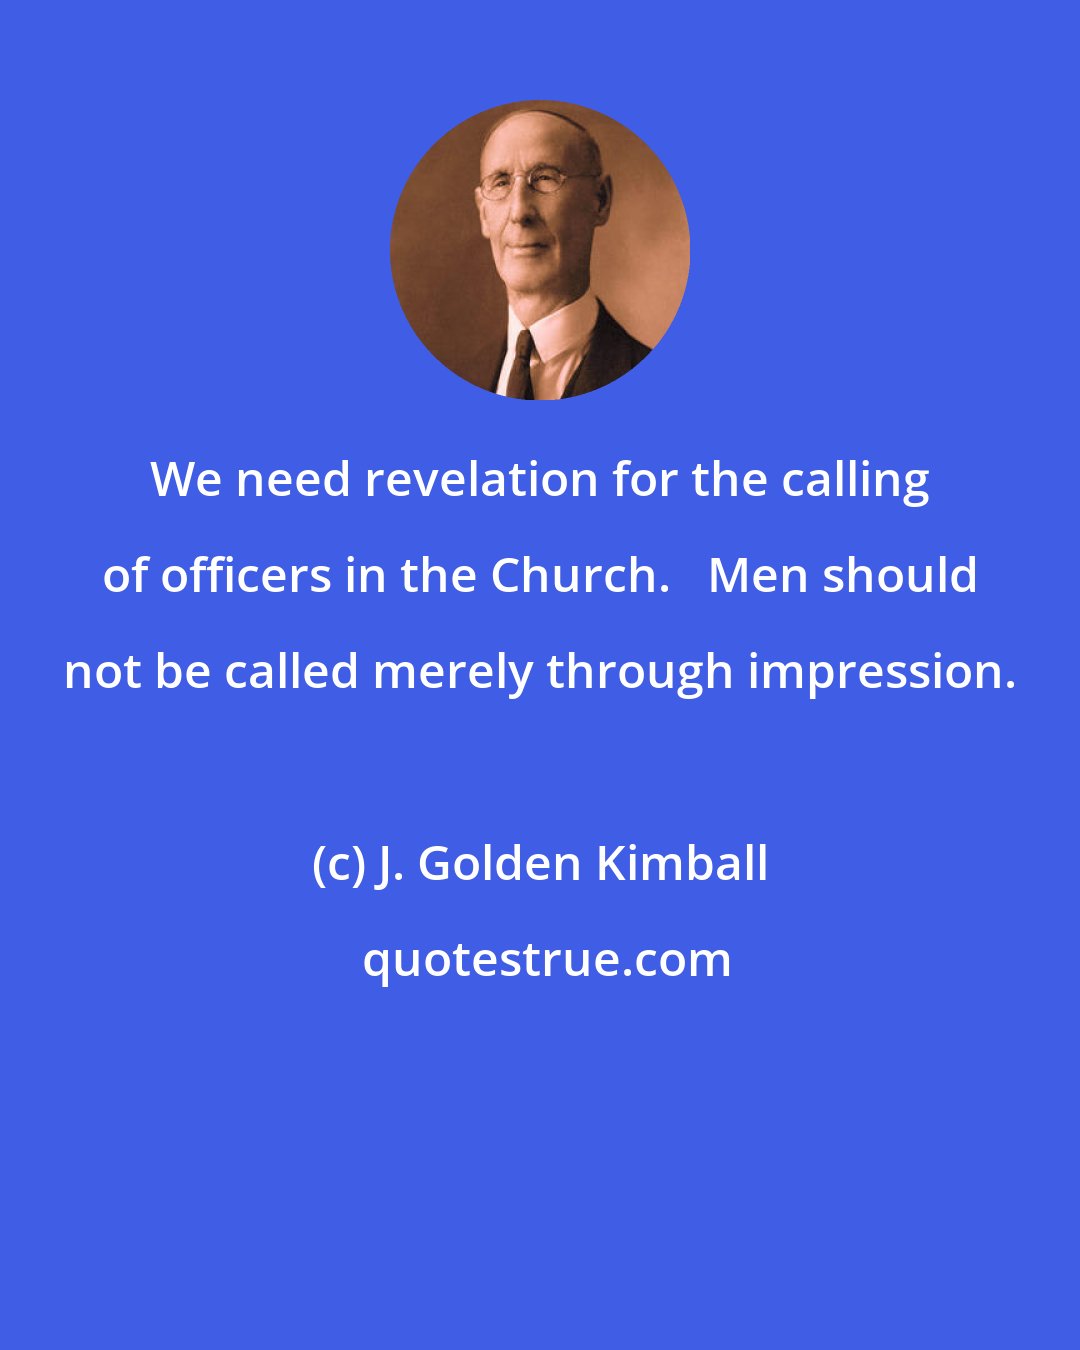 J. Golden Kimball: We need revelation for the calling of officers in the Church.   Men should not be called merely through impression.